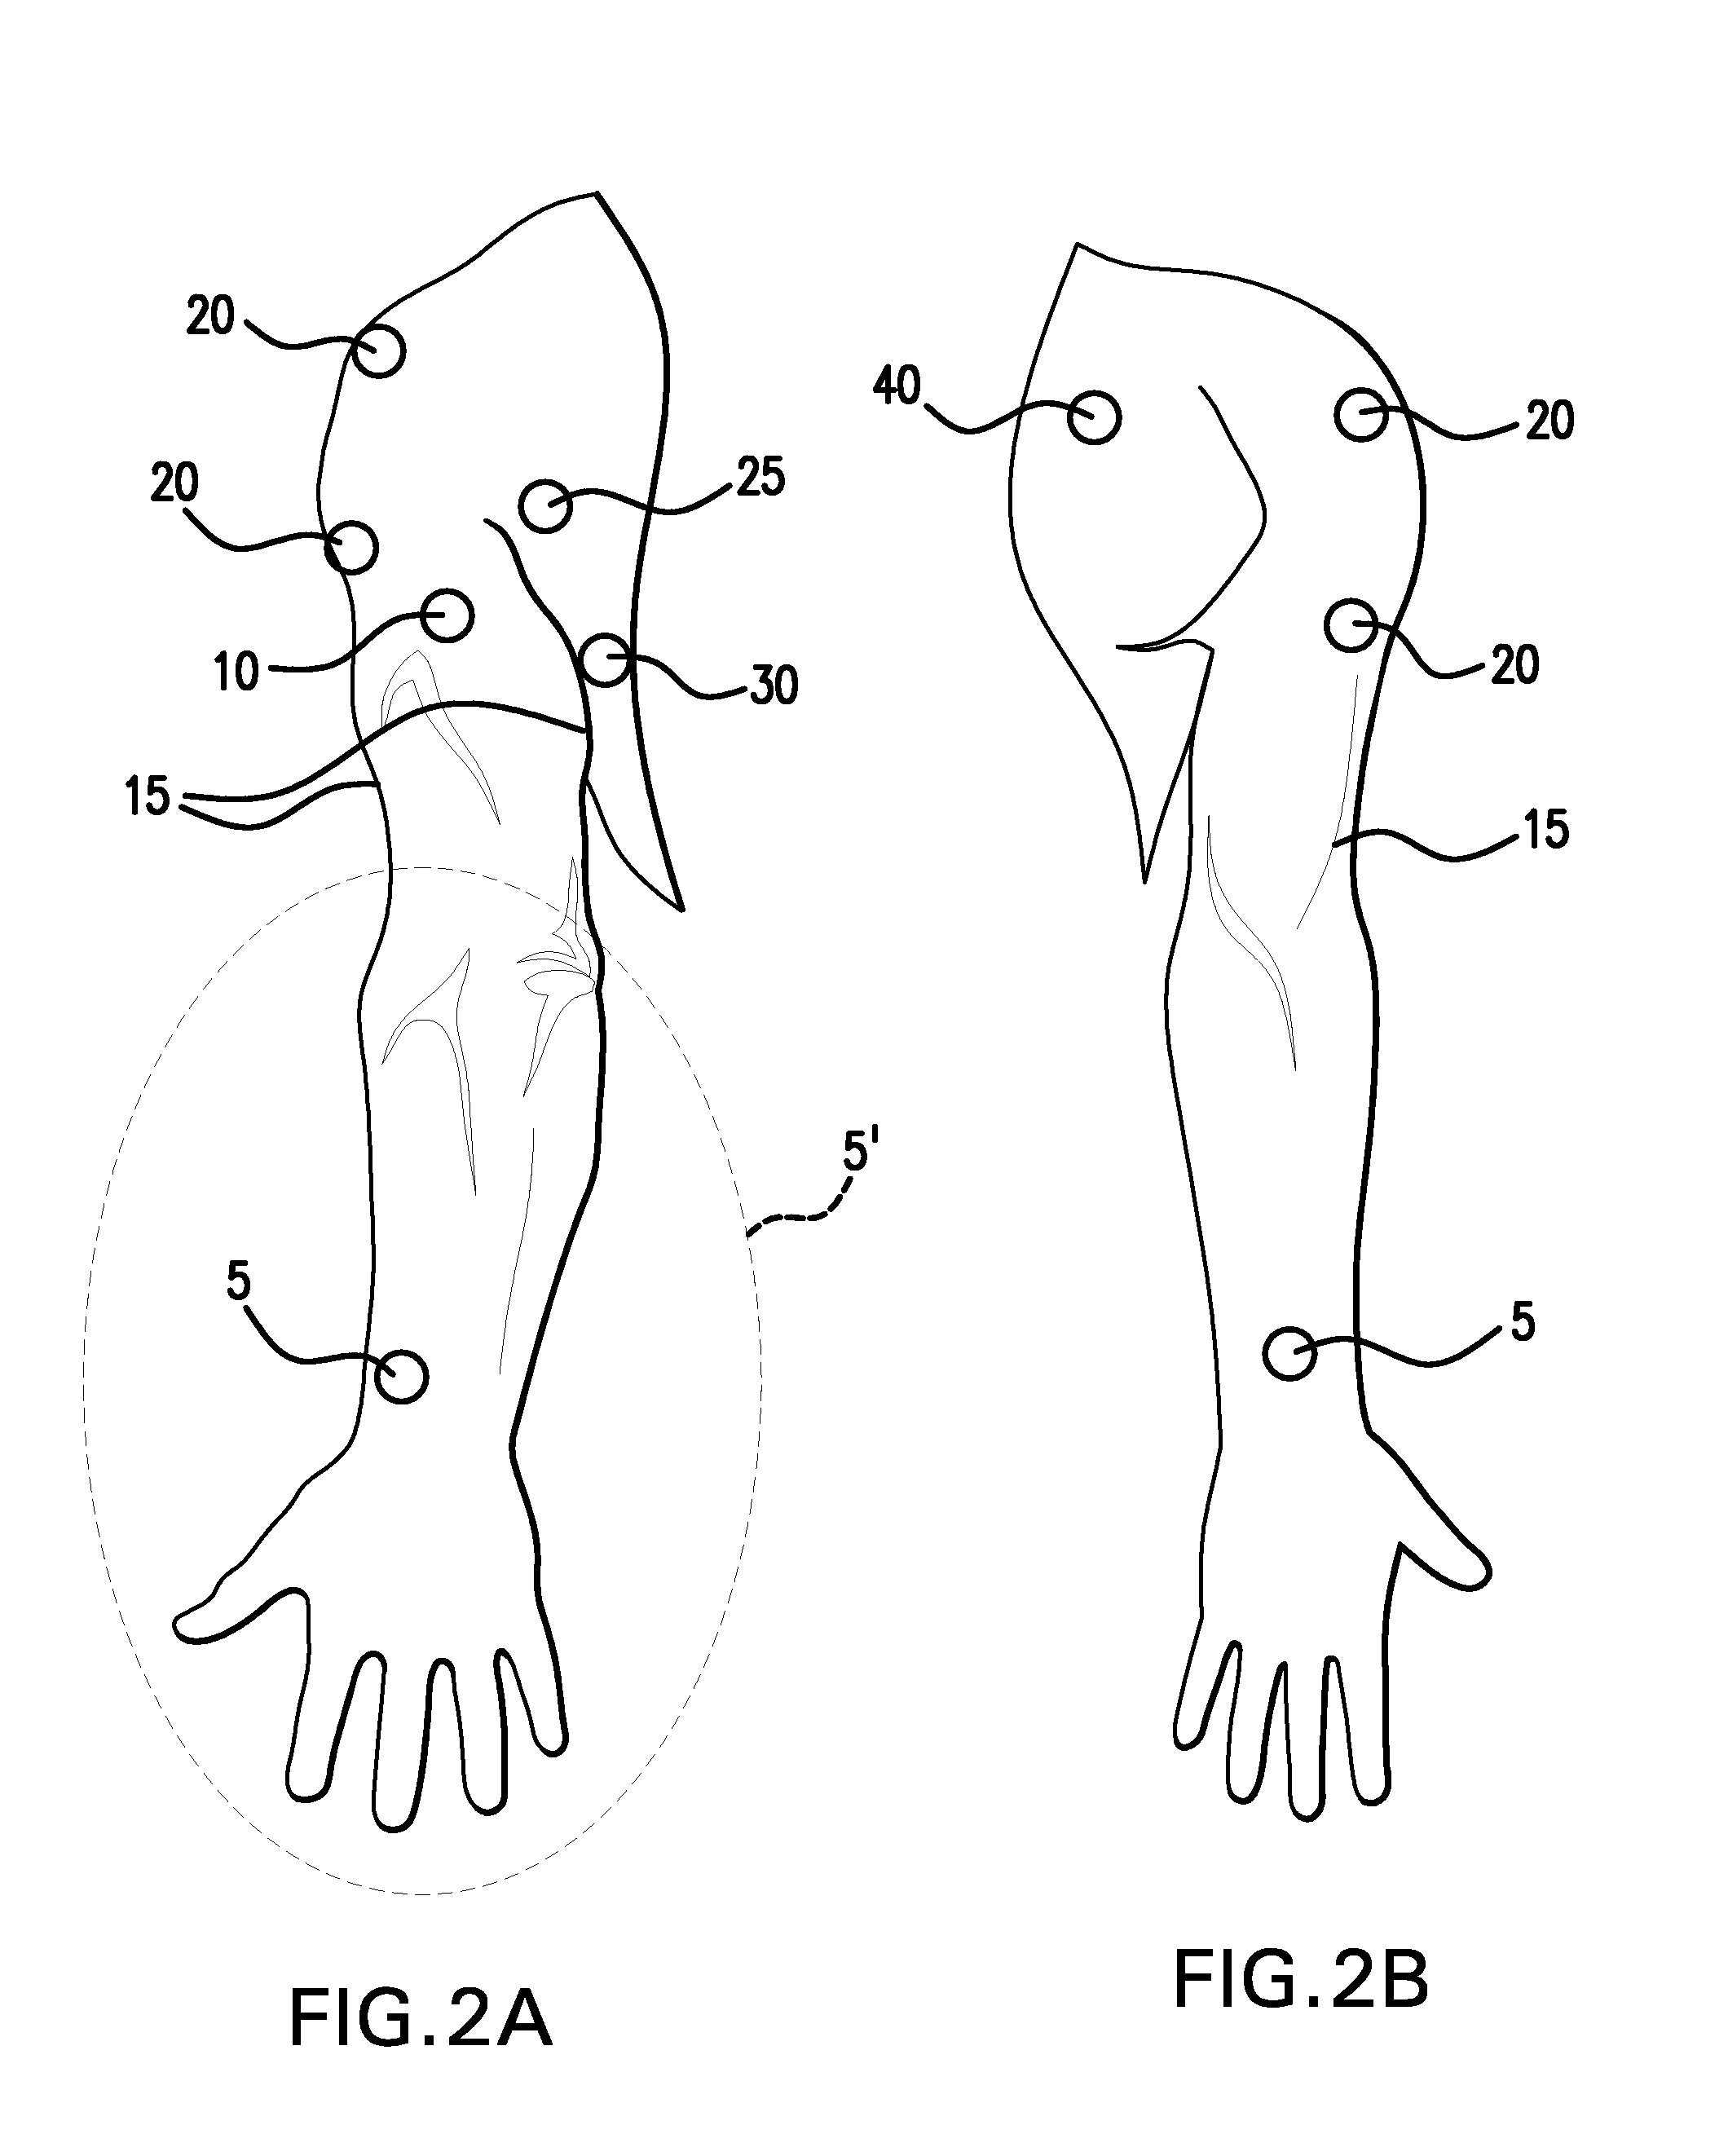 Method and apparatus for measuring heart-related parameters and deriving human status parameters from sensed physiological and contextual parameters